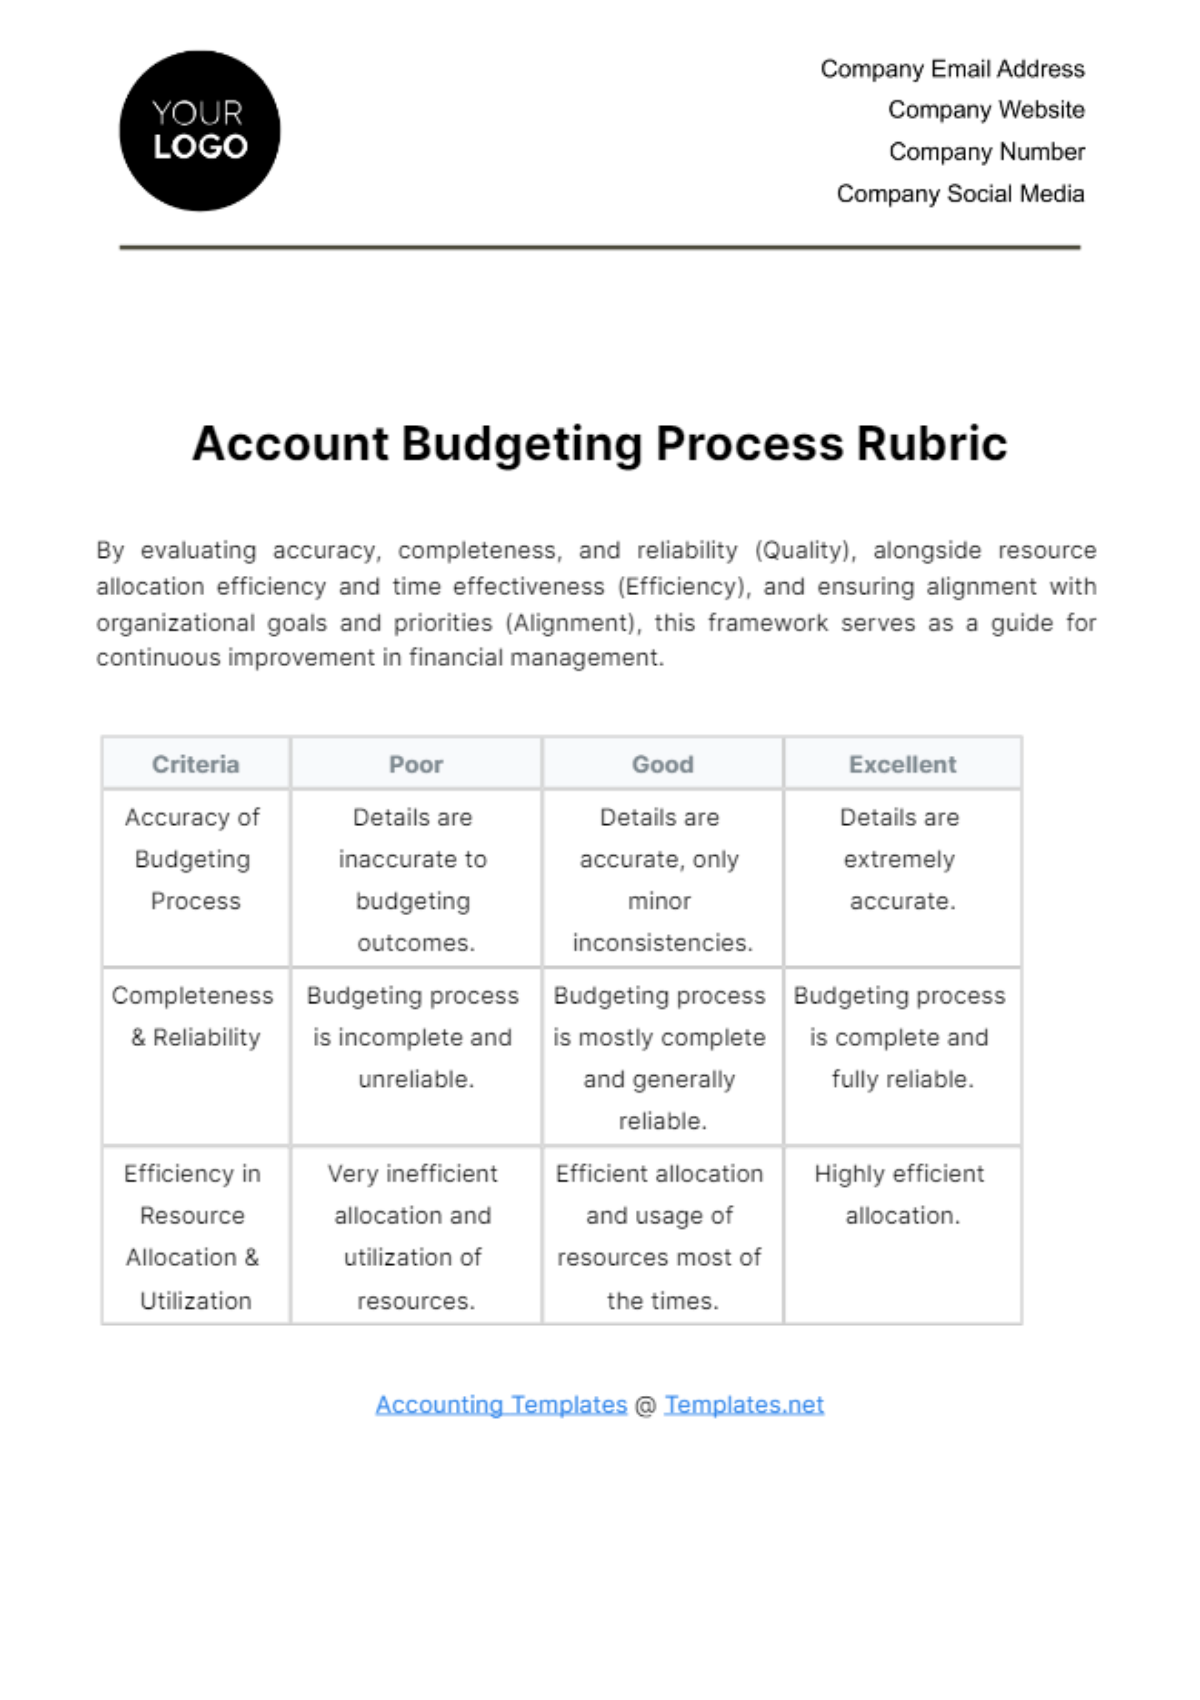 Free Account Budgeting Process Rubric Template